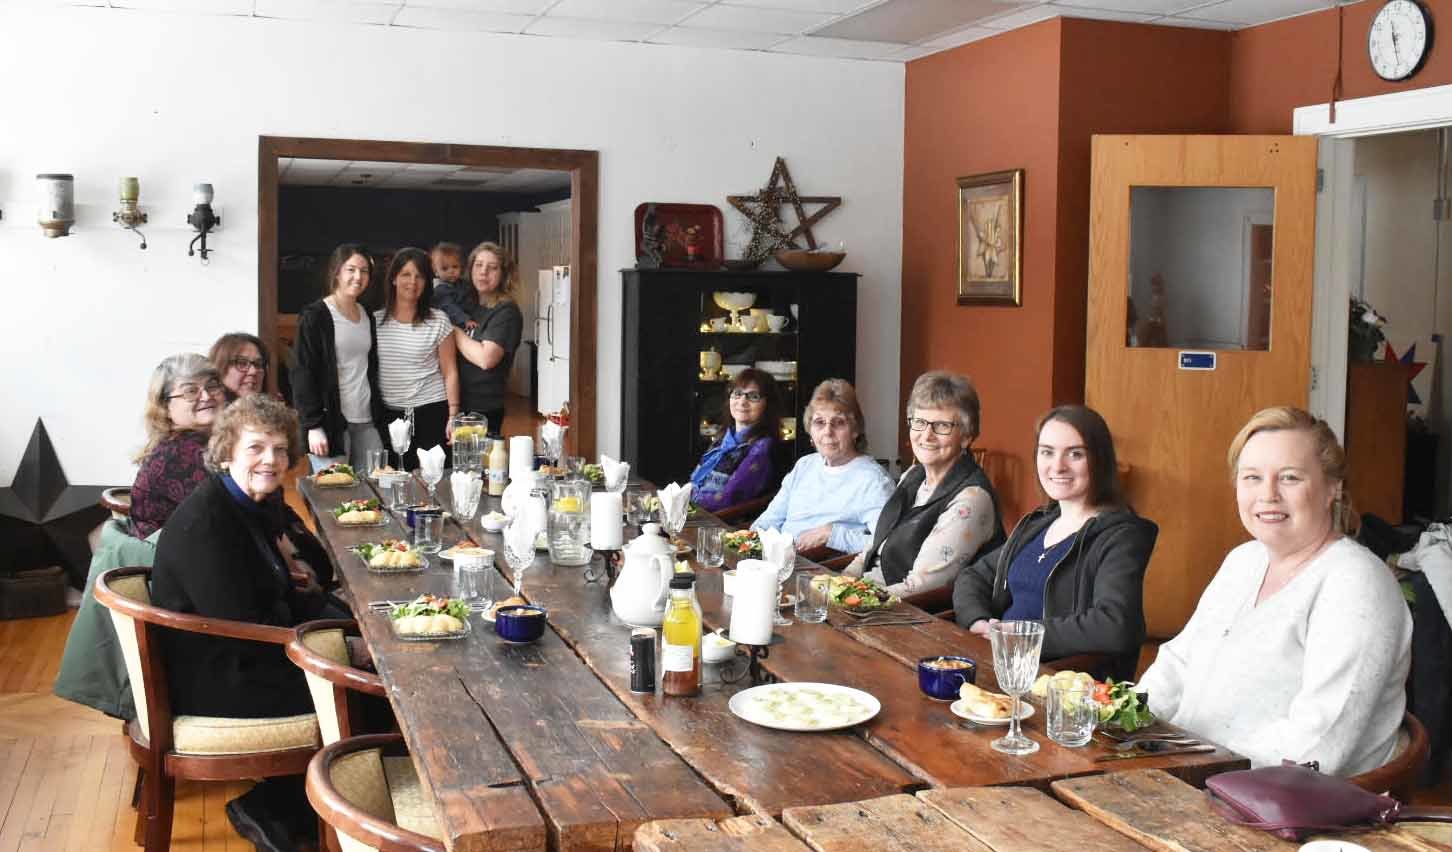 A group of Boonville Herald staff, past and present, recently enjoyed a tour and luncheon at the Restoration House in Constableville. They are in the large dining room, located upstairs, where there’s also a large kitchen, additional bedrooms, laundry room, etc., as well as a hallway filled with beautiful furniture. Standing are the hosts, from left: Alezi Zehr, Leticia “Tish” Zehr, and Courtney (Zehr) Lubula holding her son Joshua. Seated, at left, front to back are Jane Sanford, Cindy Pritchard and Dawn Pfendler. Seated at right, front to back, Eileen Pierson, business manager for the Boonville Herald/Daily Sentinel; Dina Olmstead, staff writer; Jeannie Wiedmer, Arleen Walston, and Sandra Hrim, Boonville Herald editor. Missing from photo is photographer Nichole Moore.